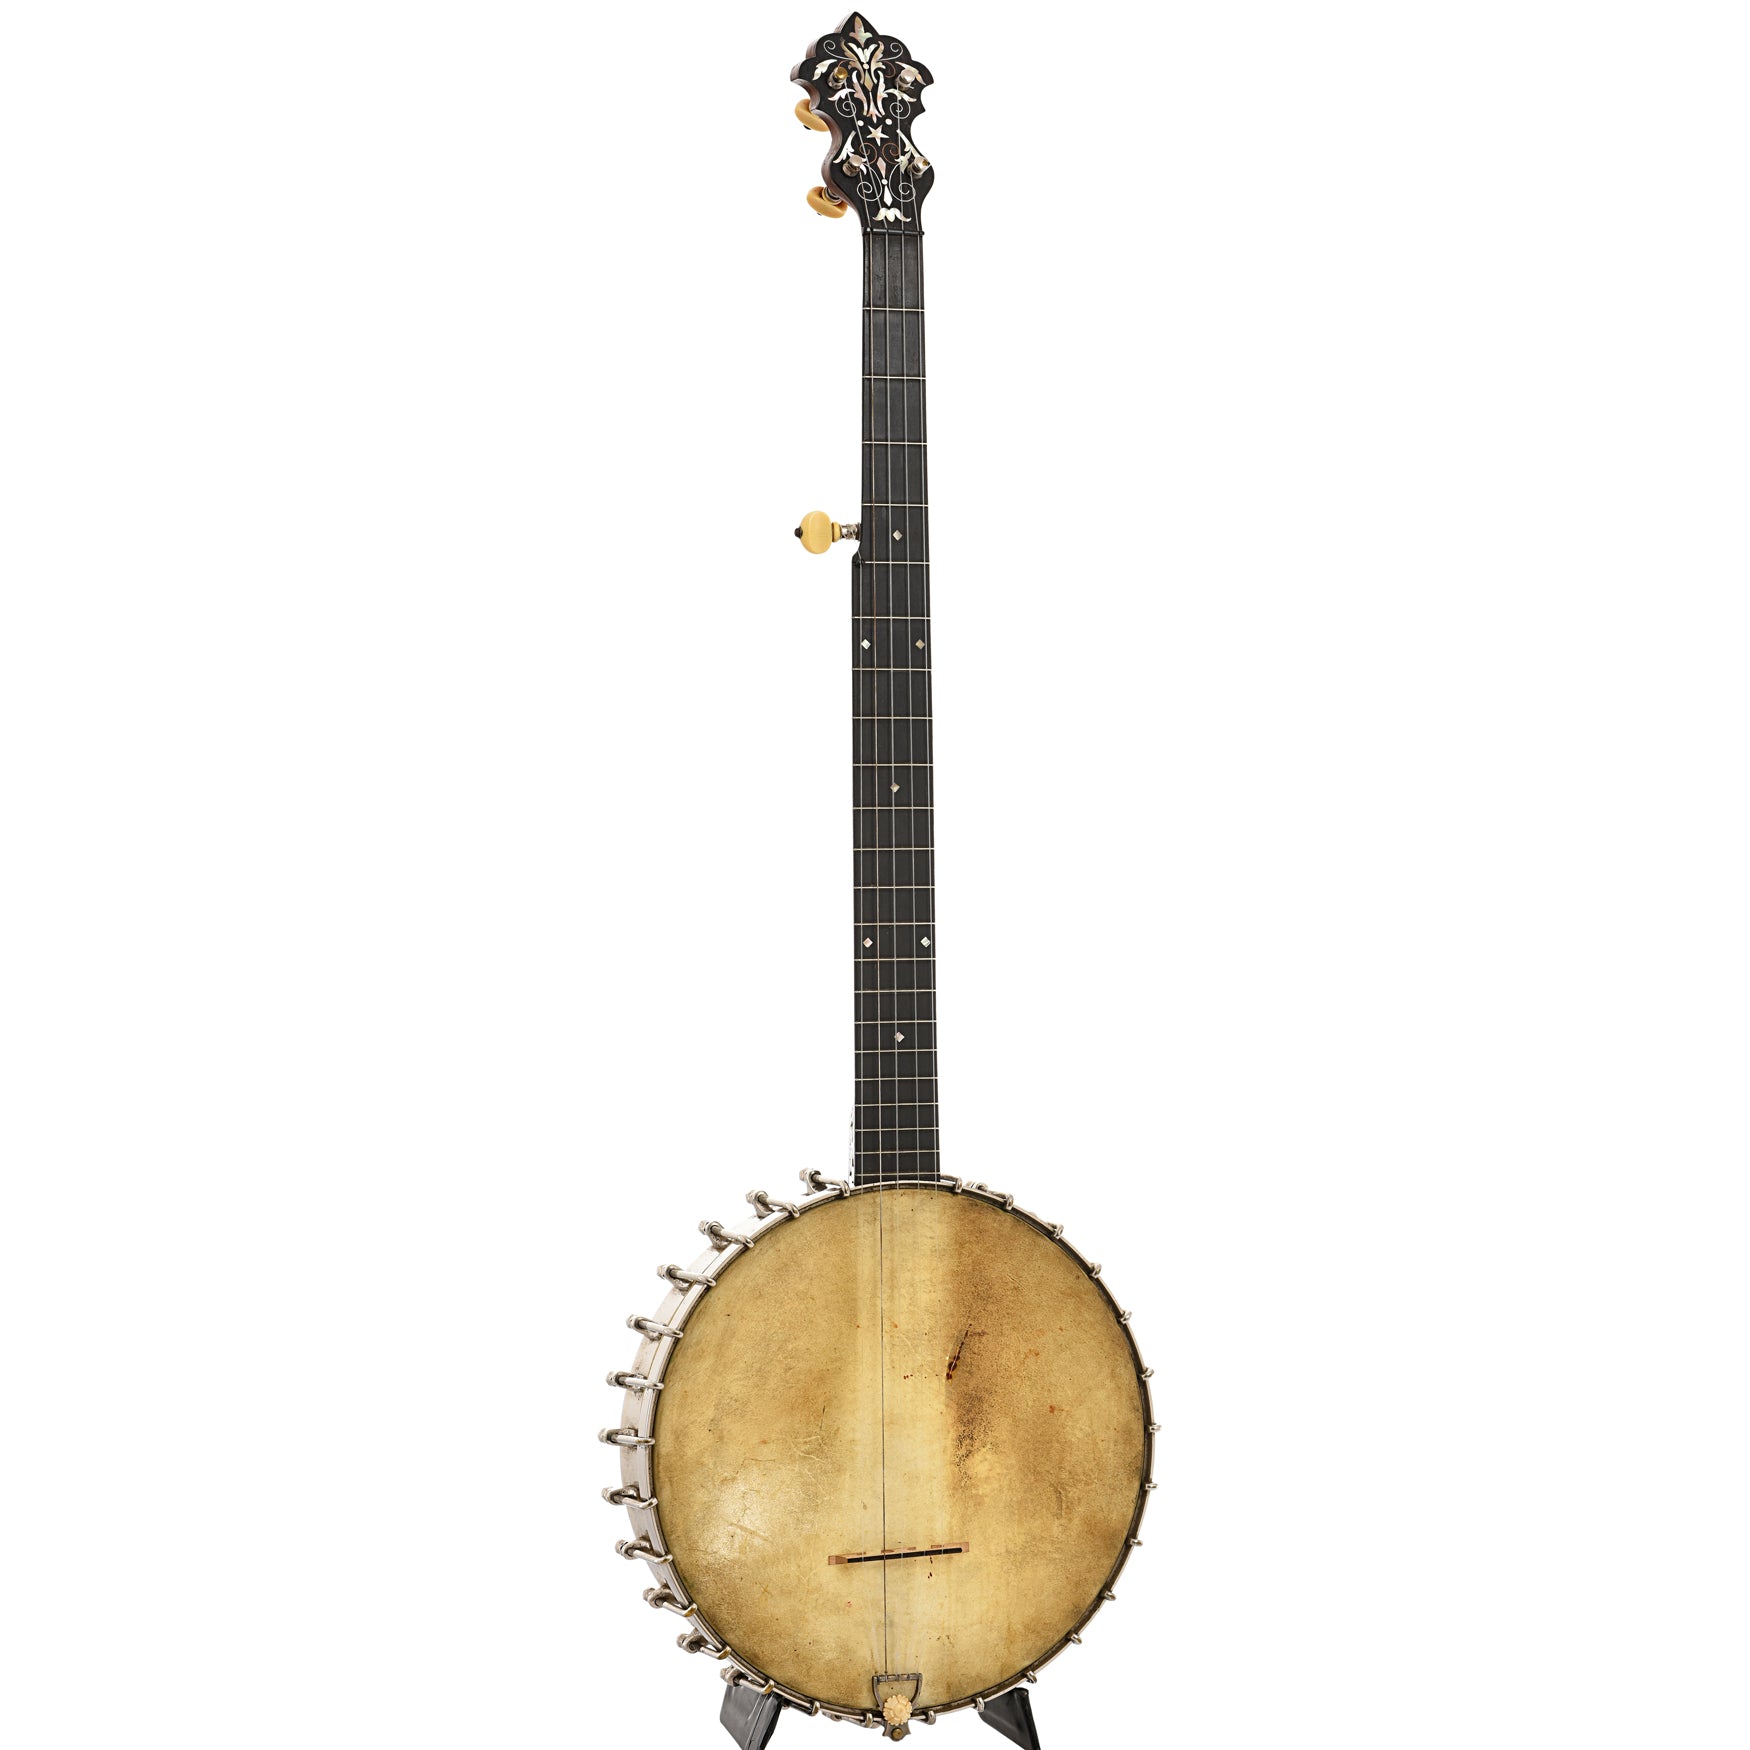 Full front and side of S.S. Stewart Special Thoroughbred Open Back Banjo (c.1890)